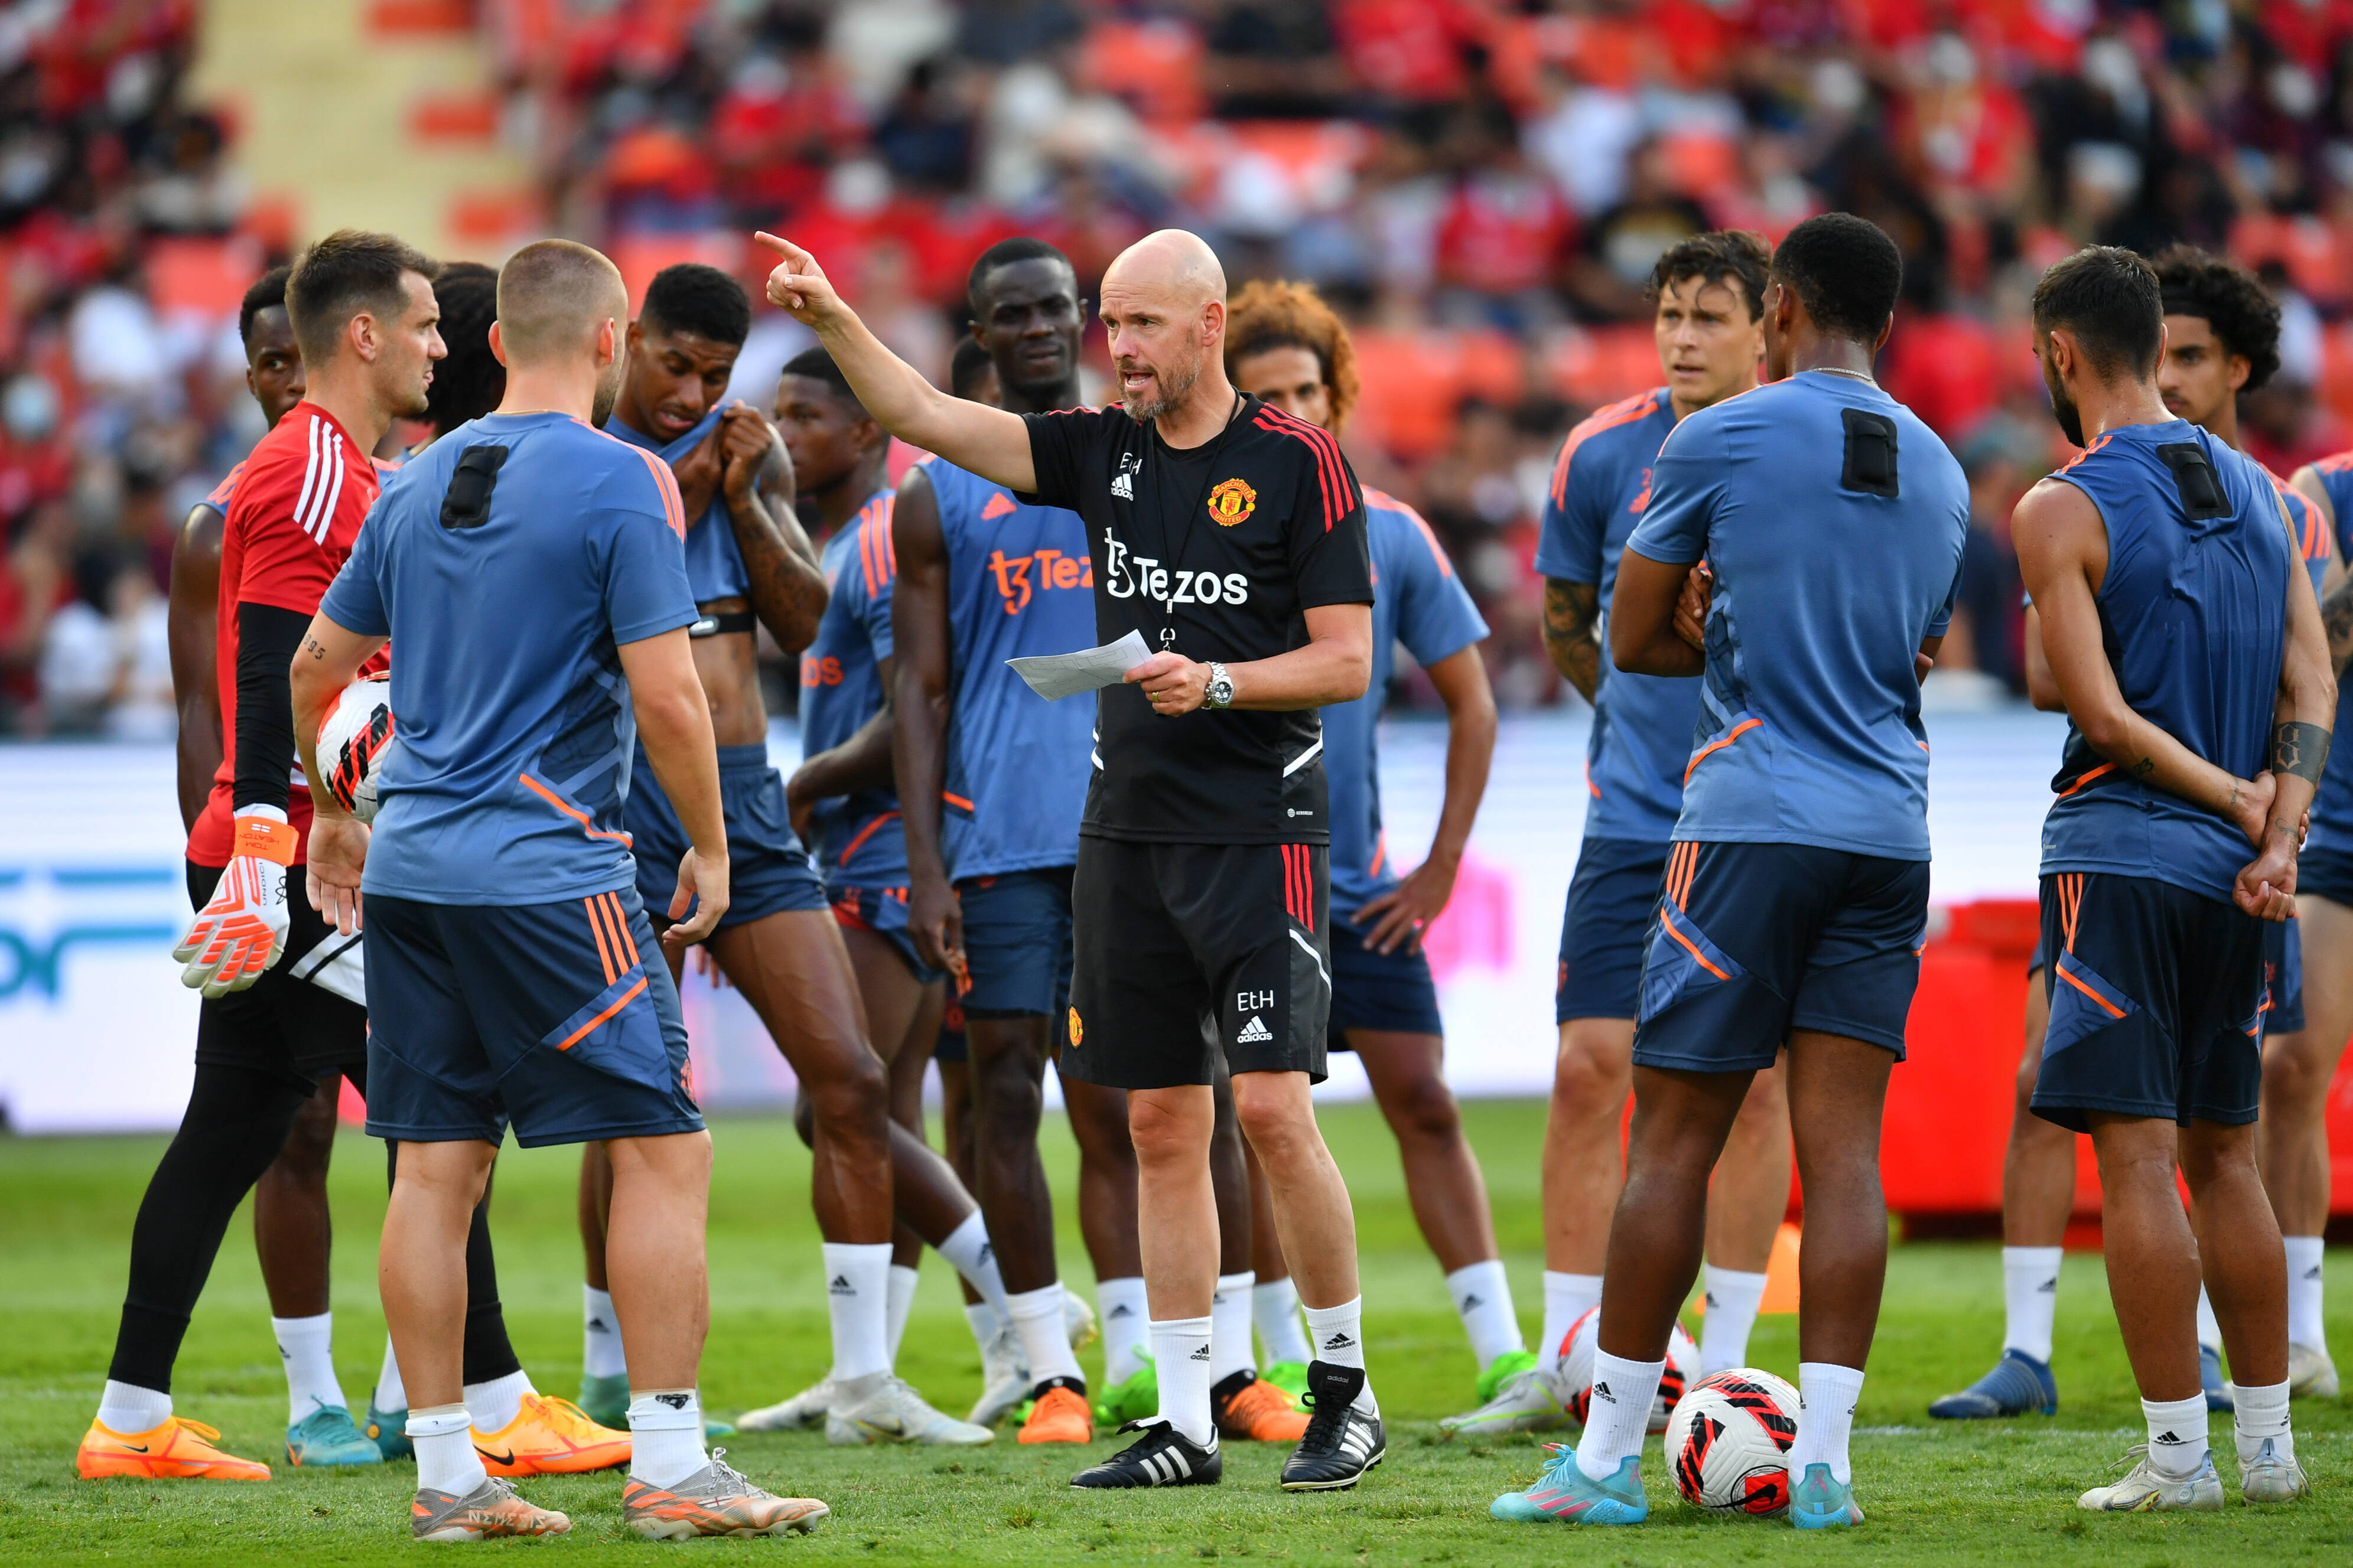 Erik ten Hag (center) pictured giving instructions to his Manchester United players ahead of a friendly game against Liverpool in Thailand in July 2022